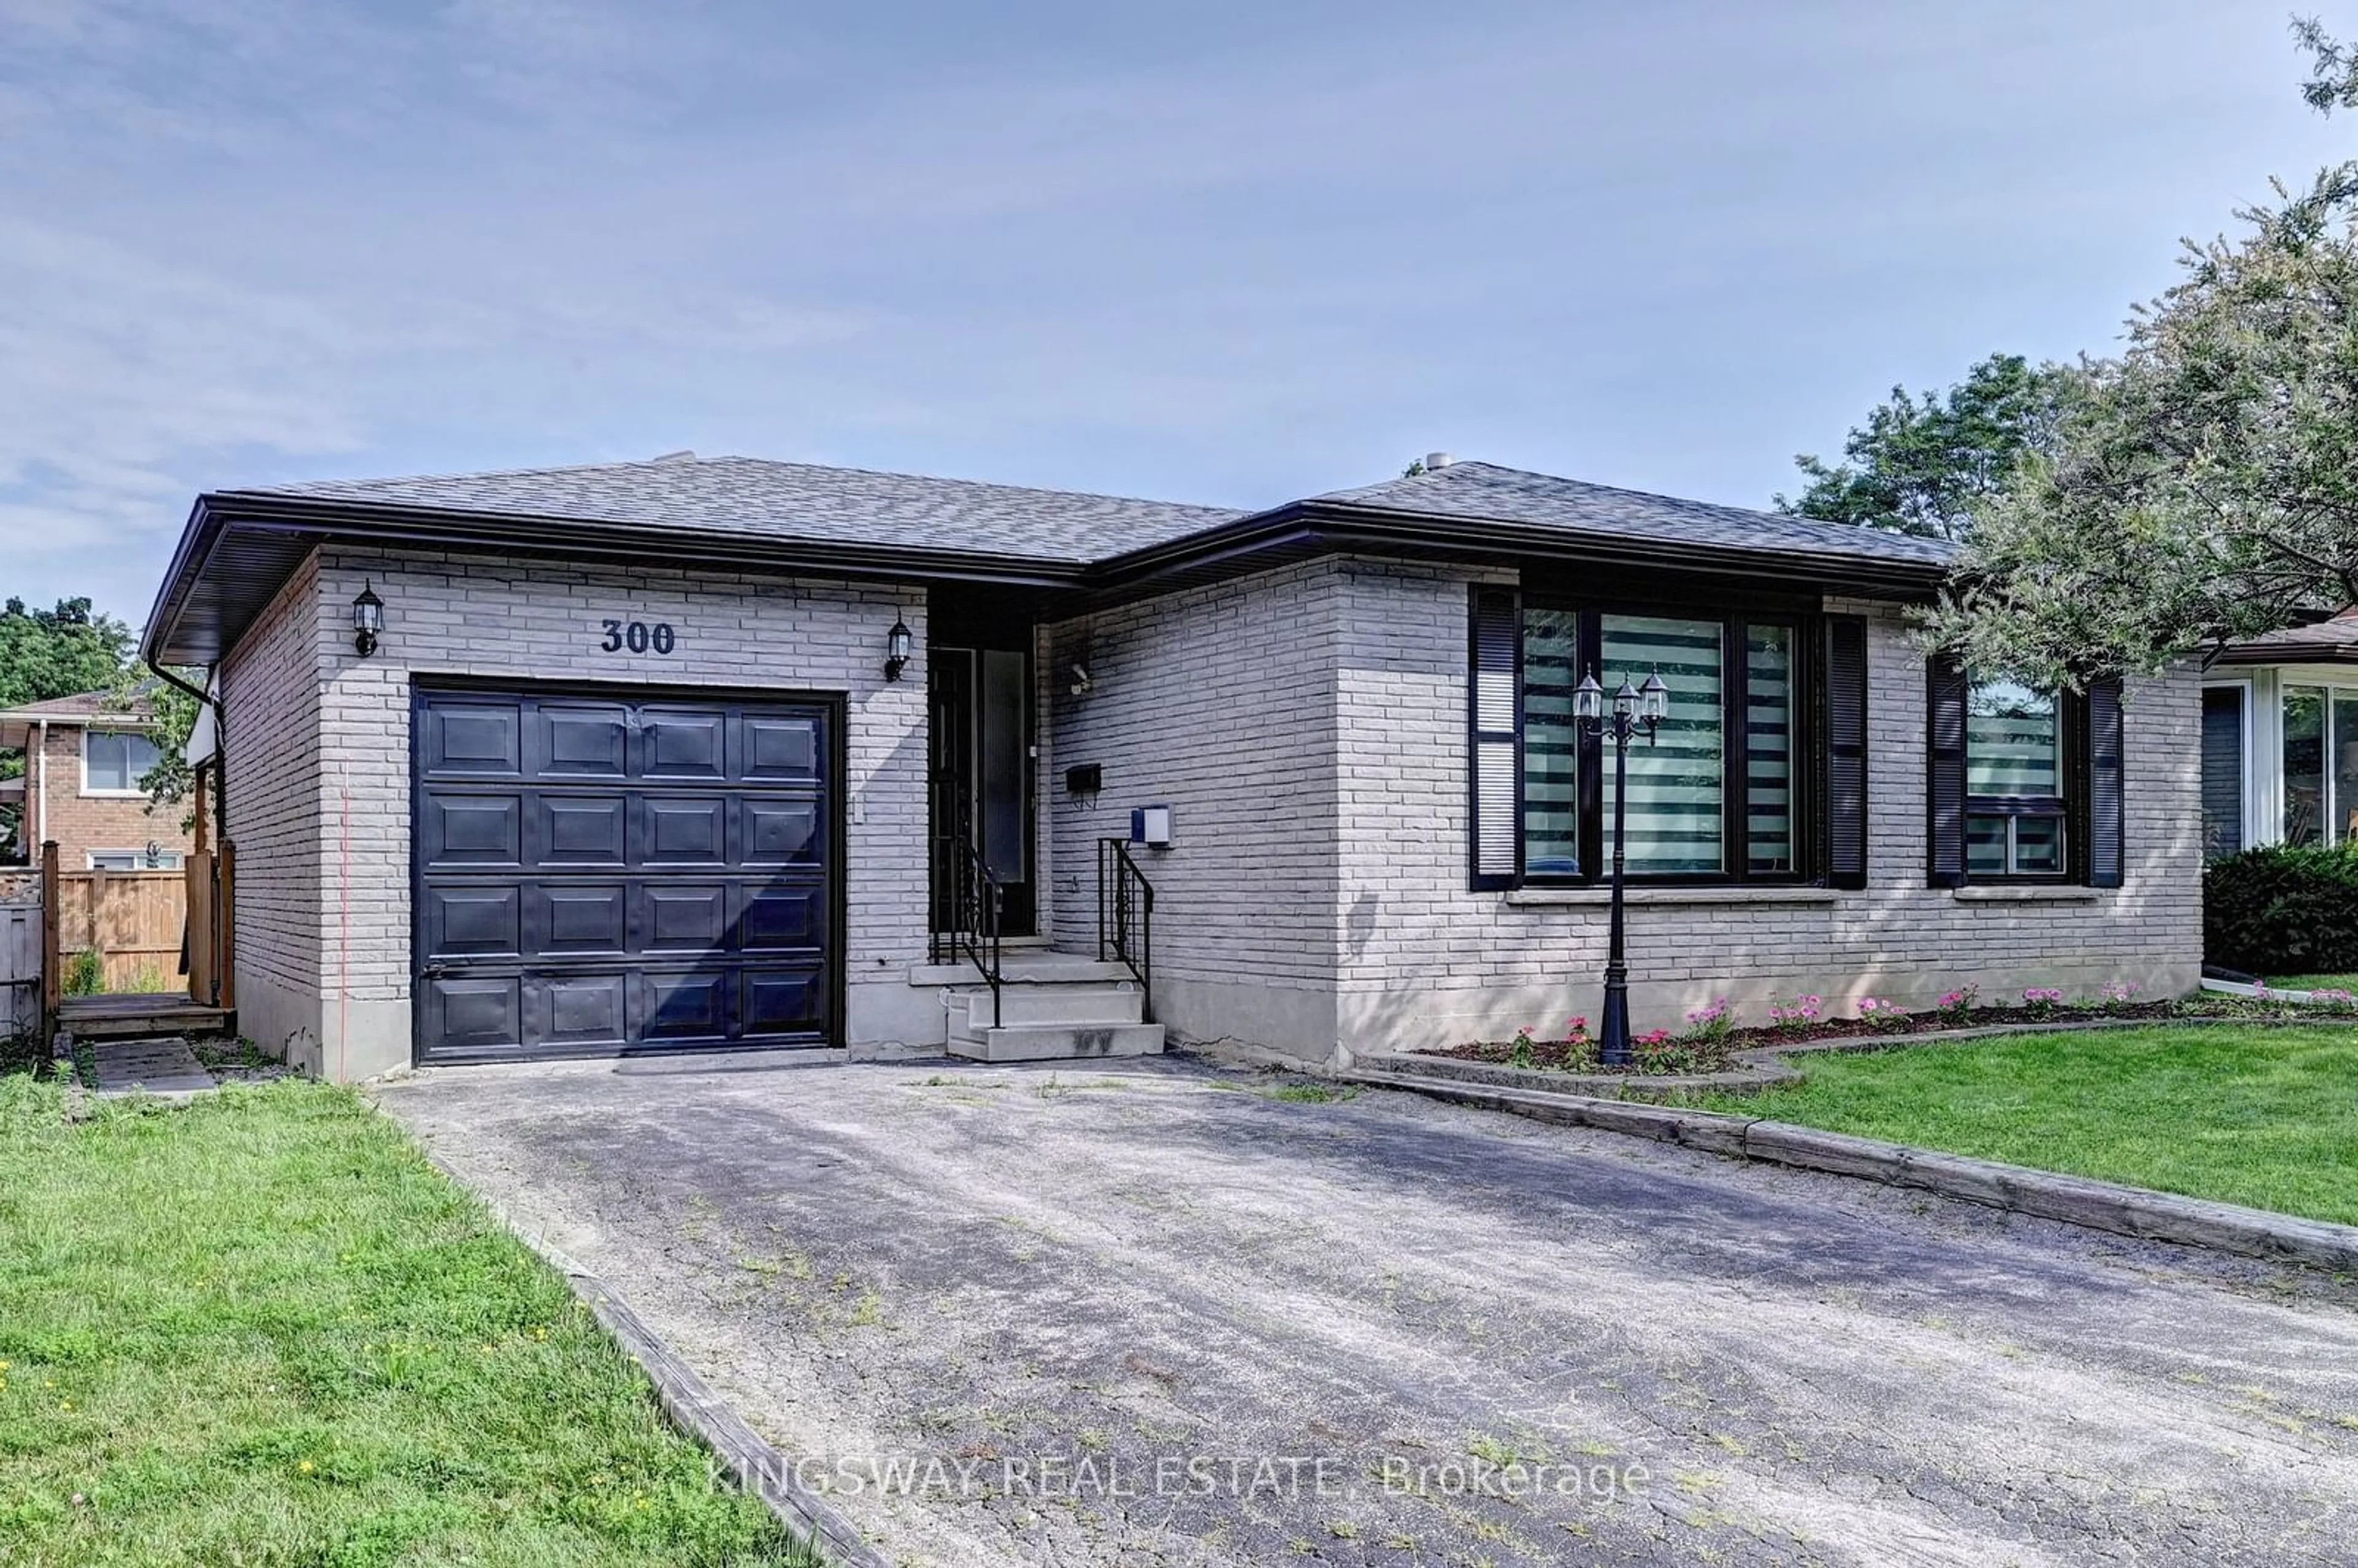 Home with brick exterior material for 300 BLACKWELL Dr, Kitchener Ontario N2N 2T2